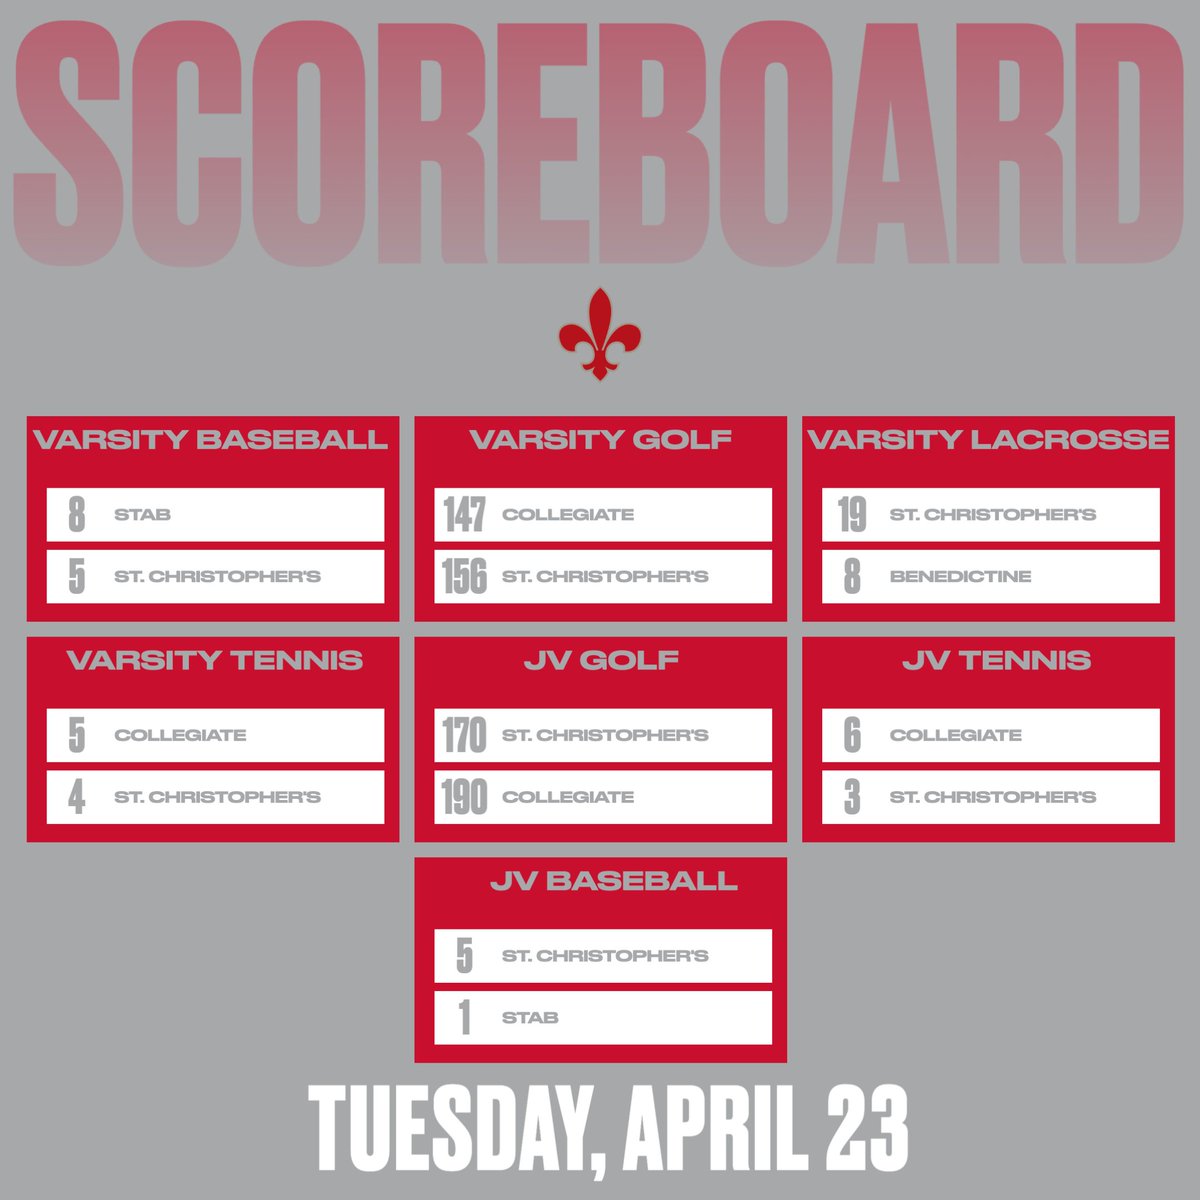 All final scores from Tuesday, April 23